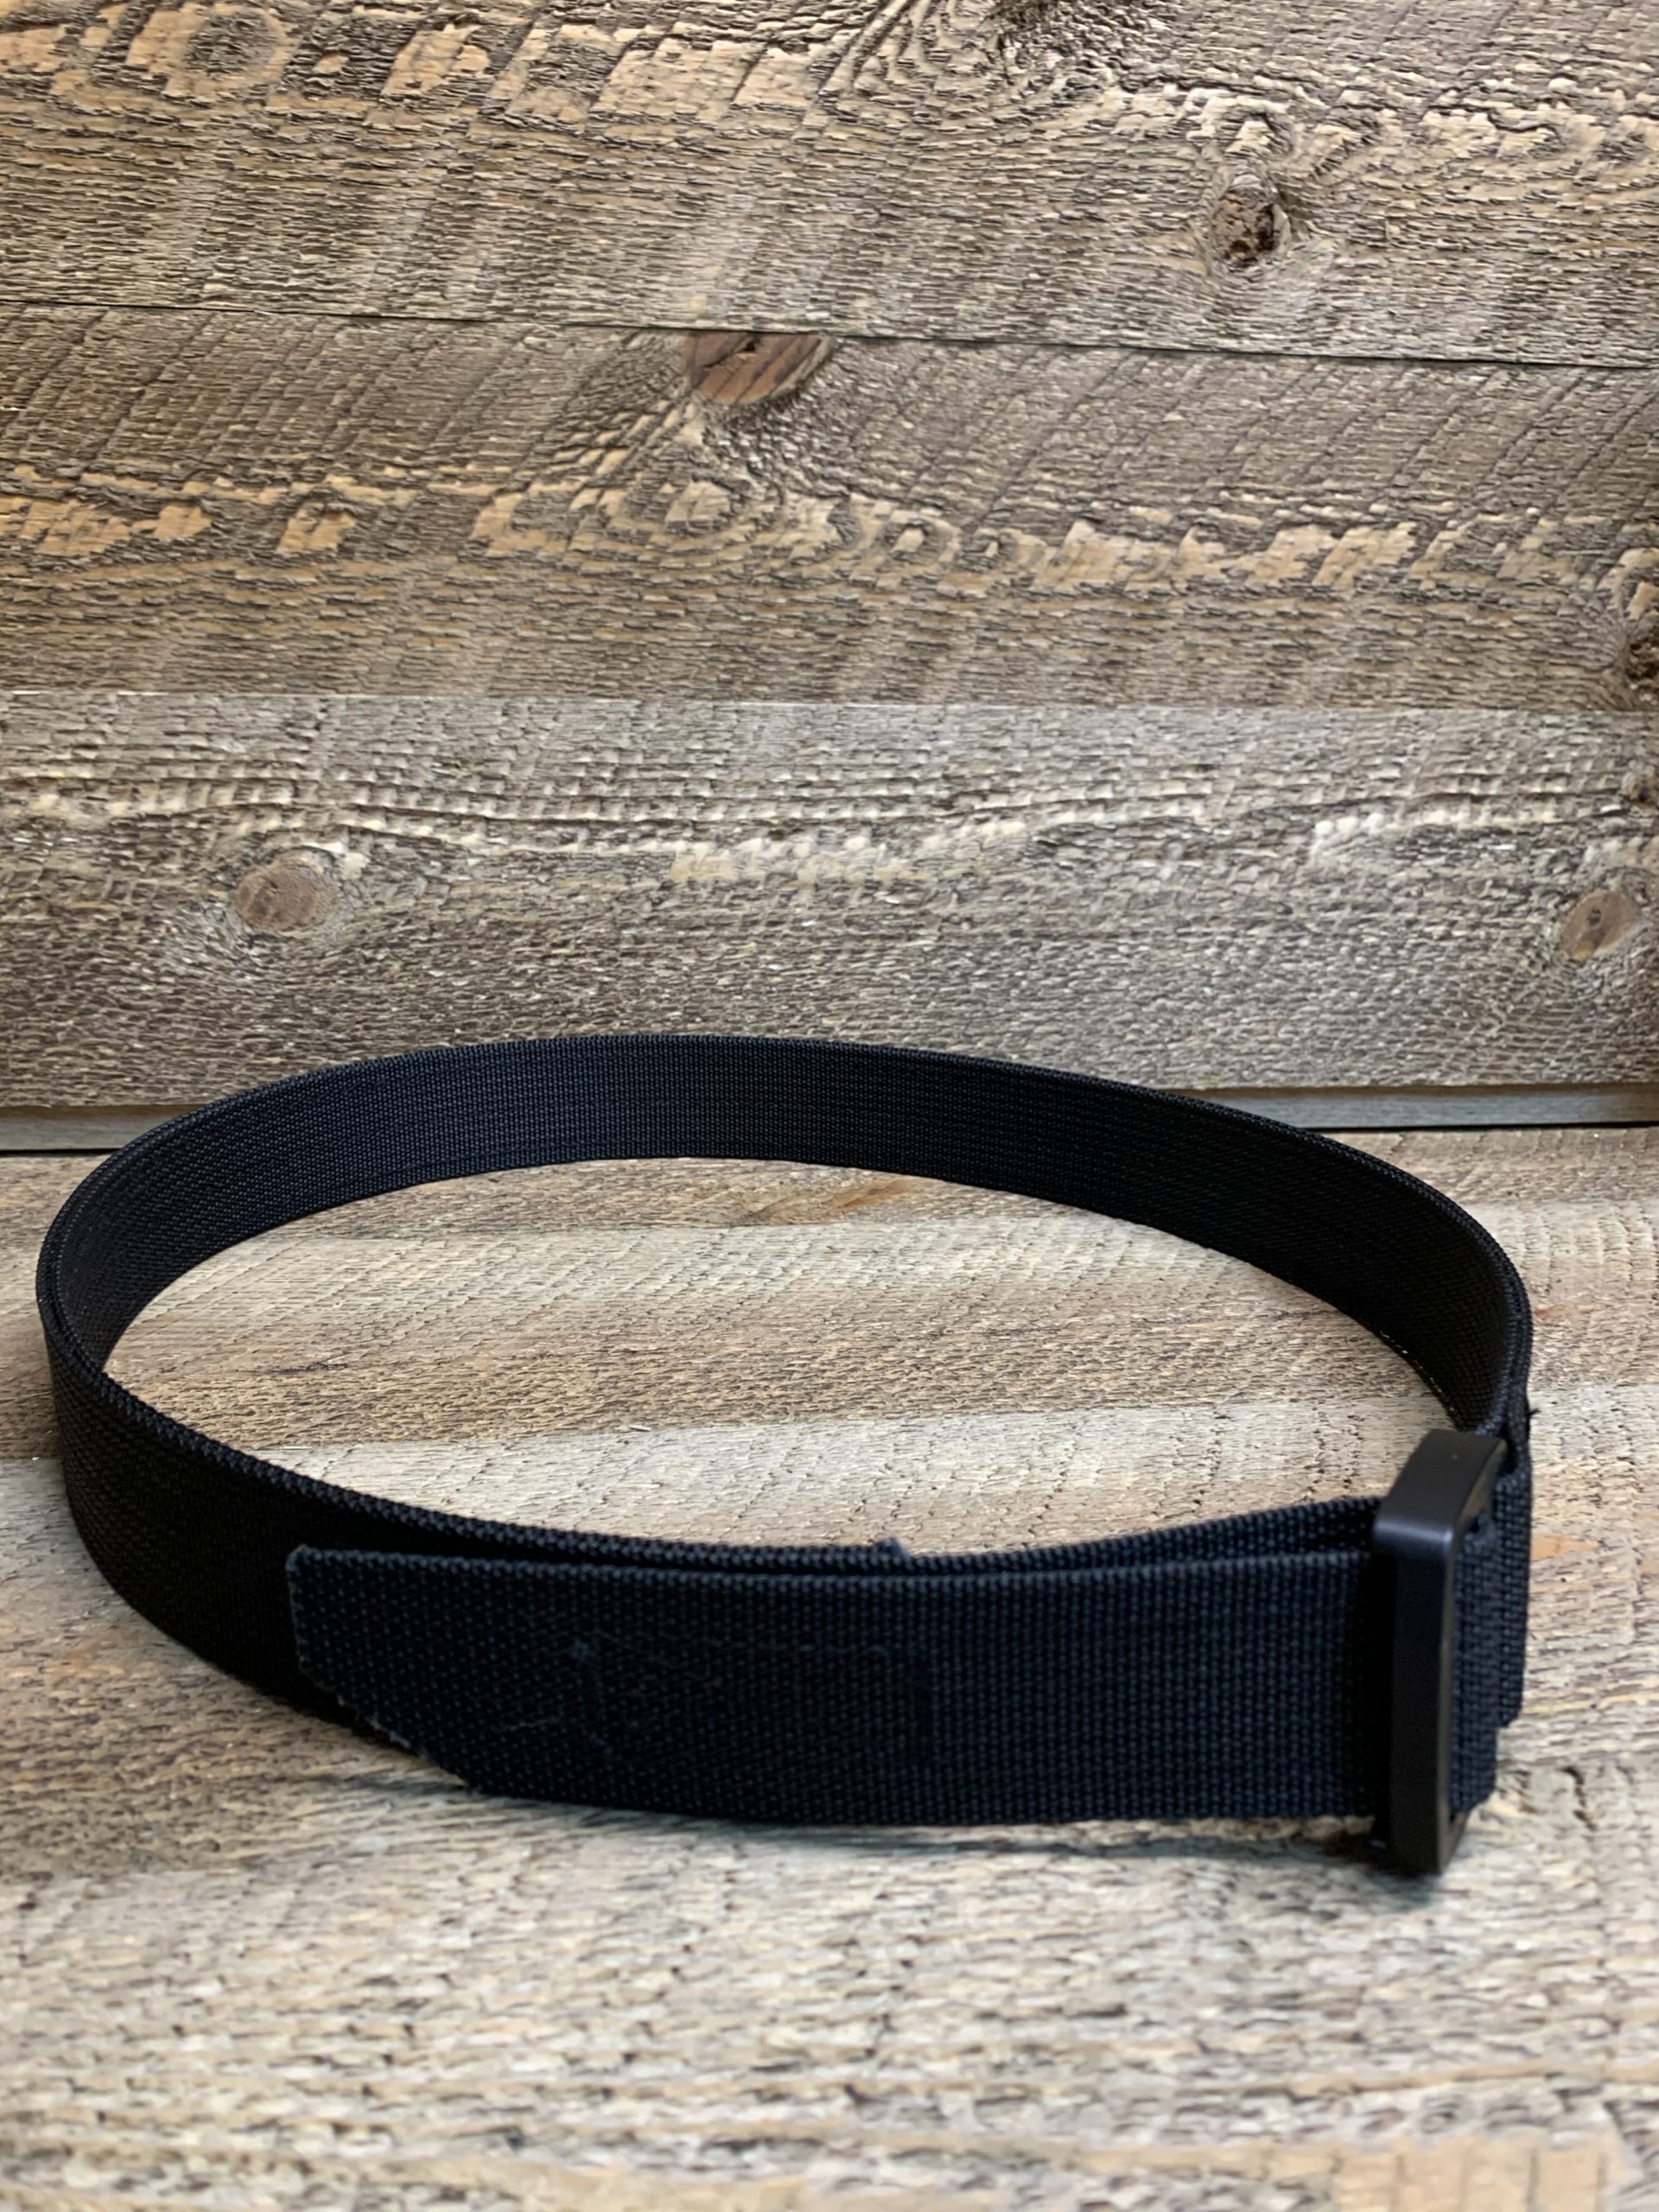 Concealed Carry Belt - Rigor Arms